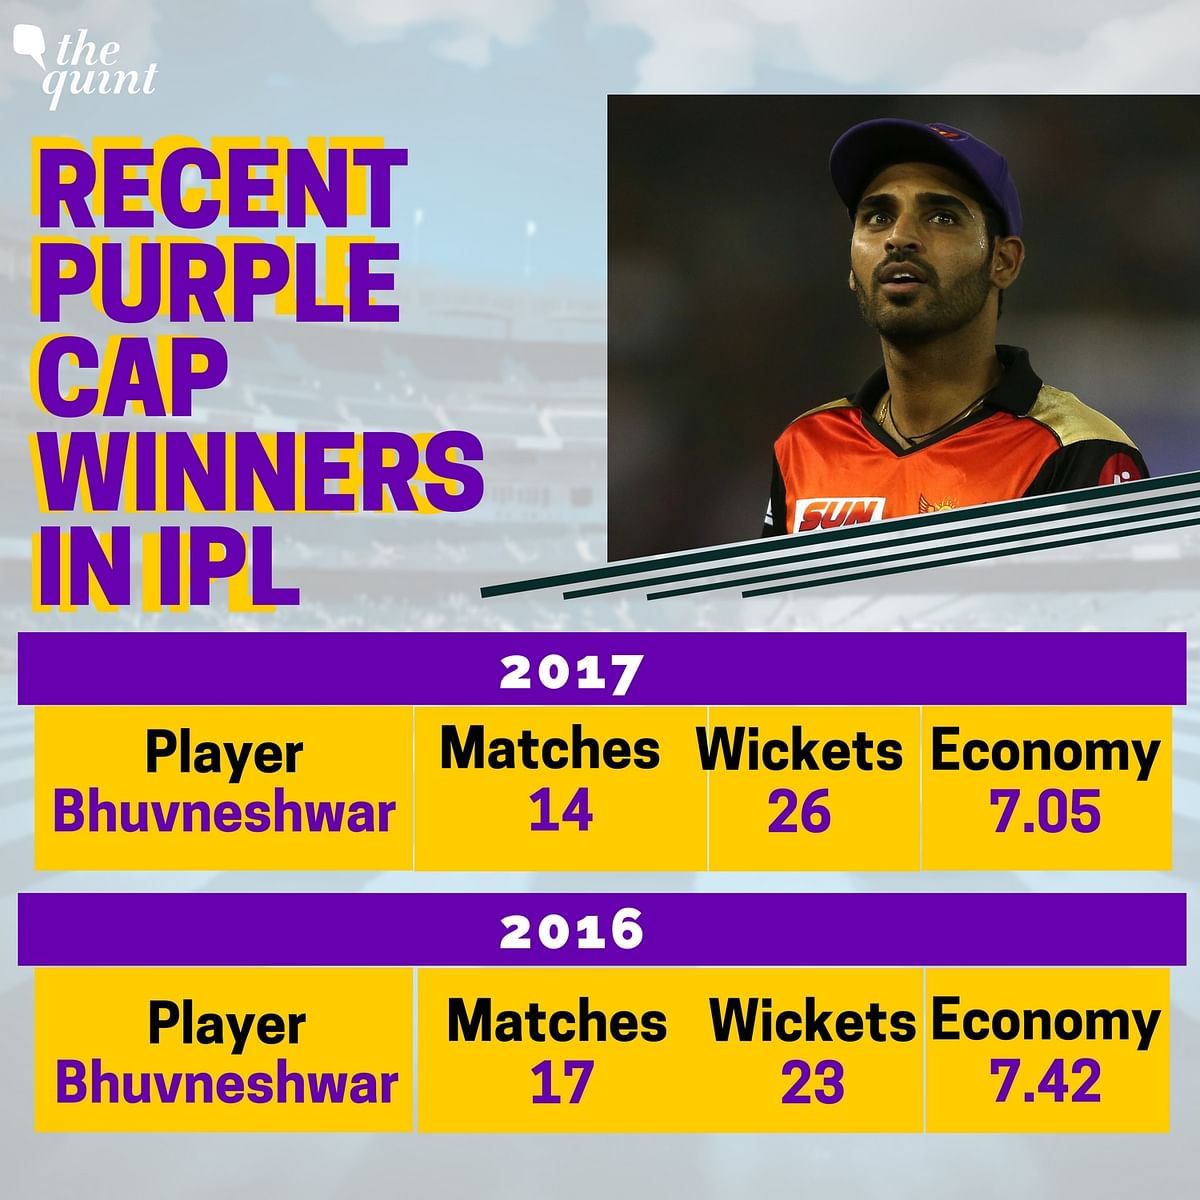 Bhuvneshwar Kumar has become the complete bowler, and an integral part of the Indian team across formats.